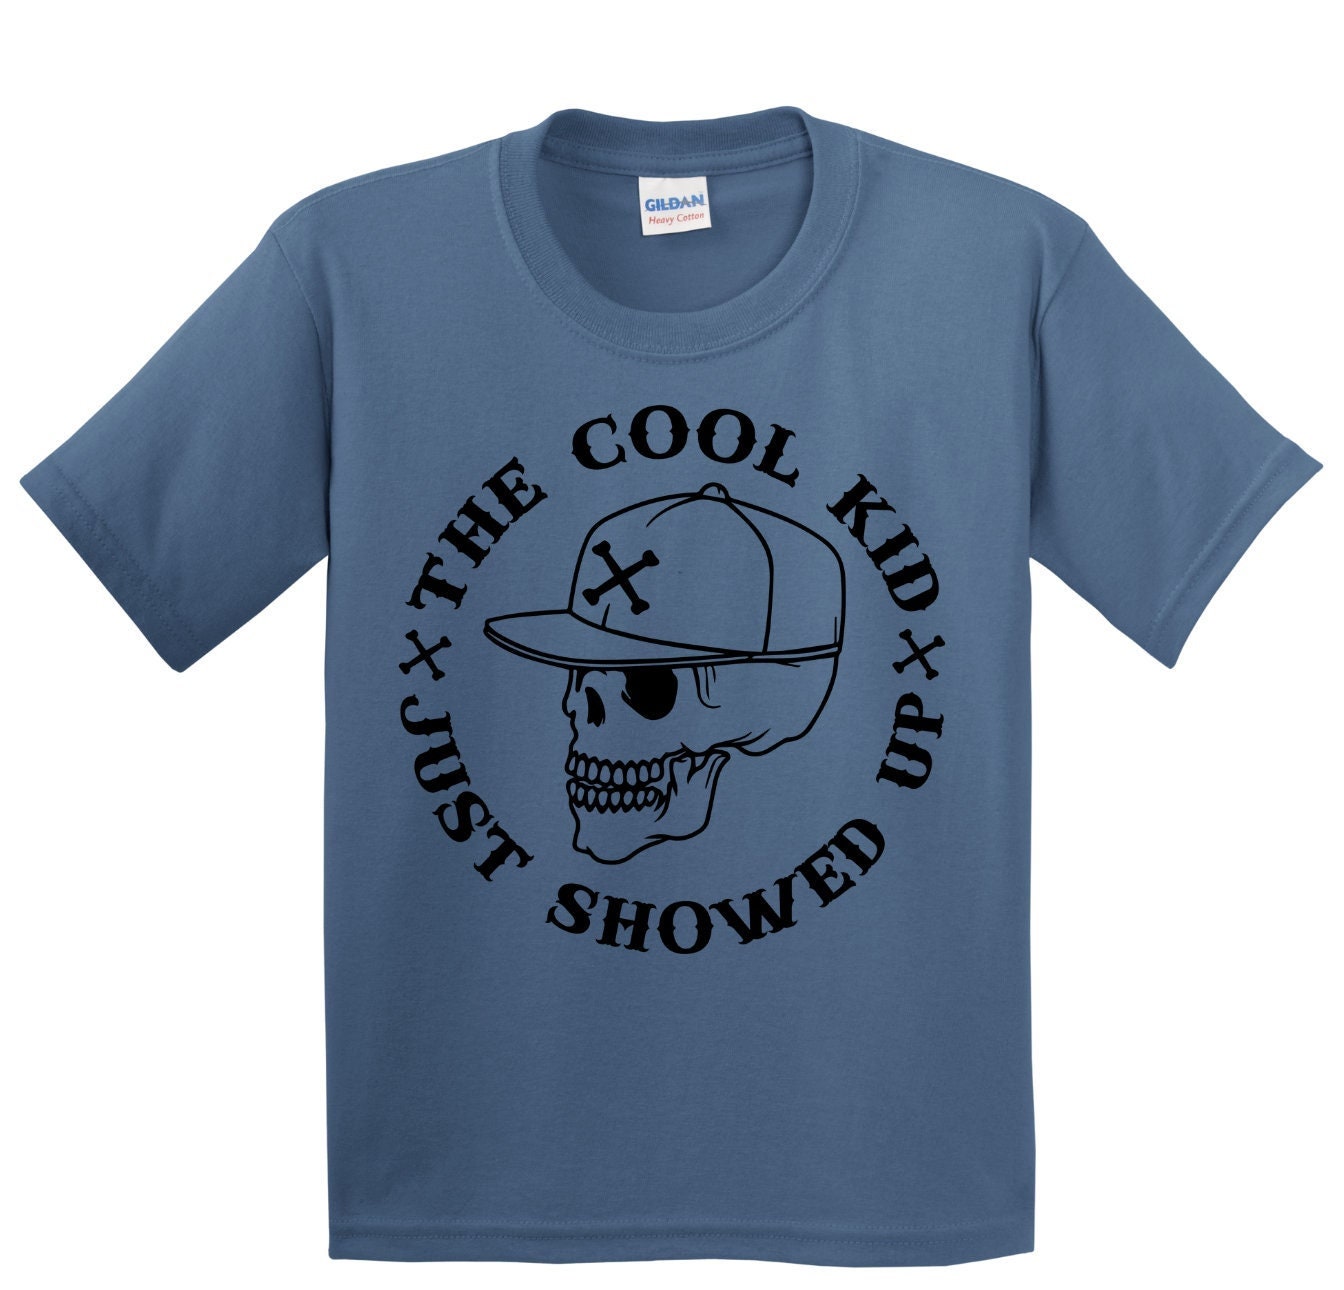 The Cool Kid Tee, Cotton